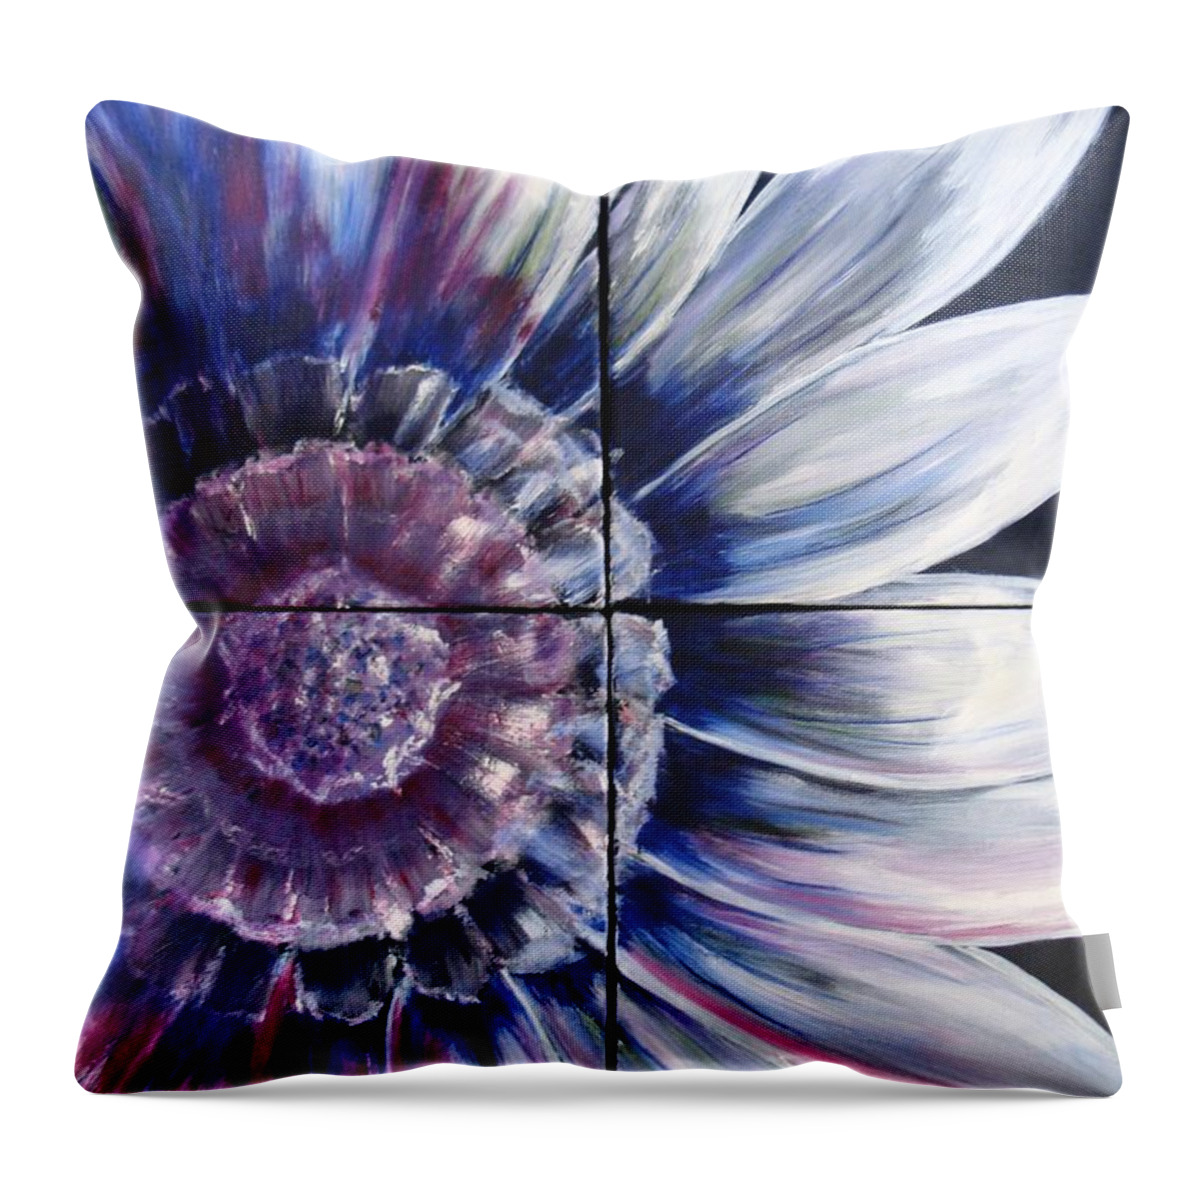 Daisy Throw Pillow featuring the painting Daisy up close by Sunel De Lange